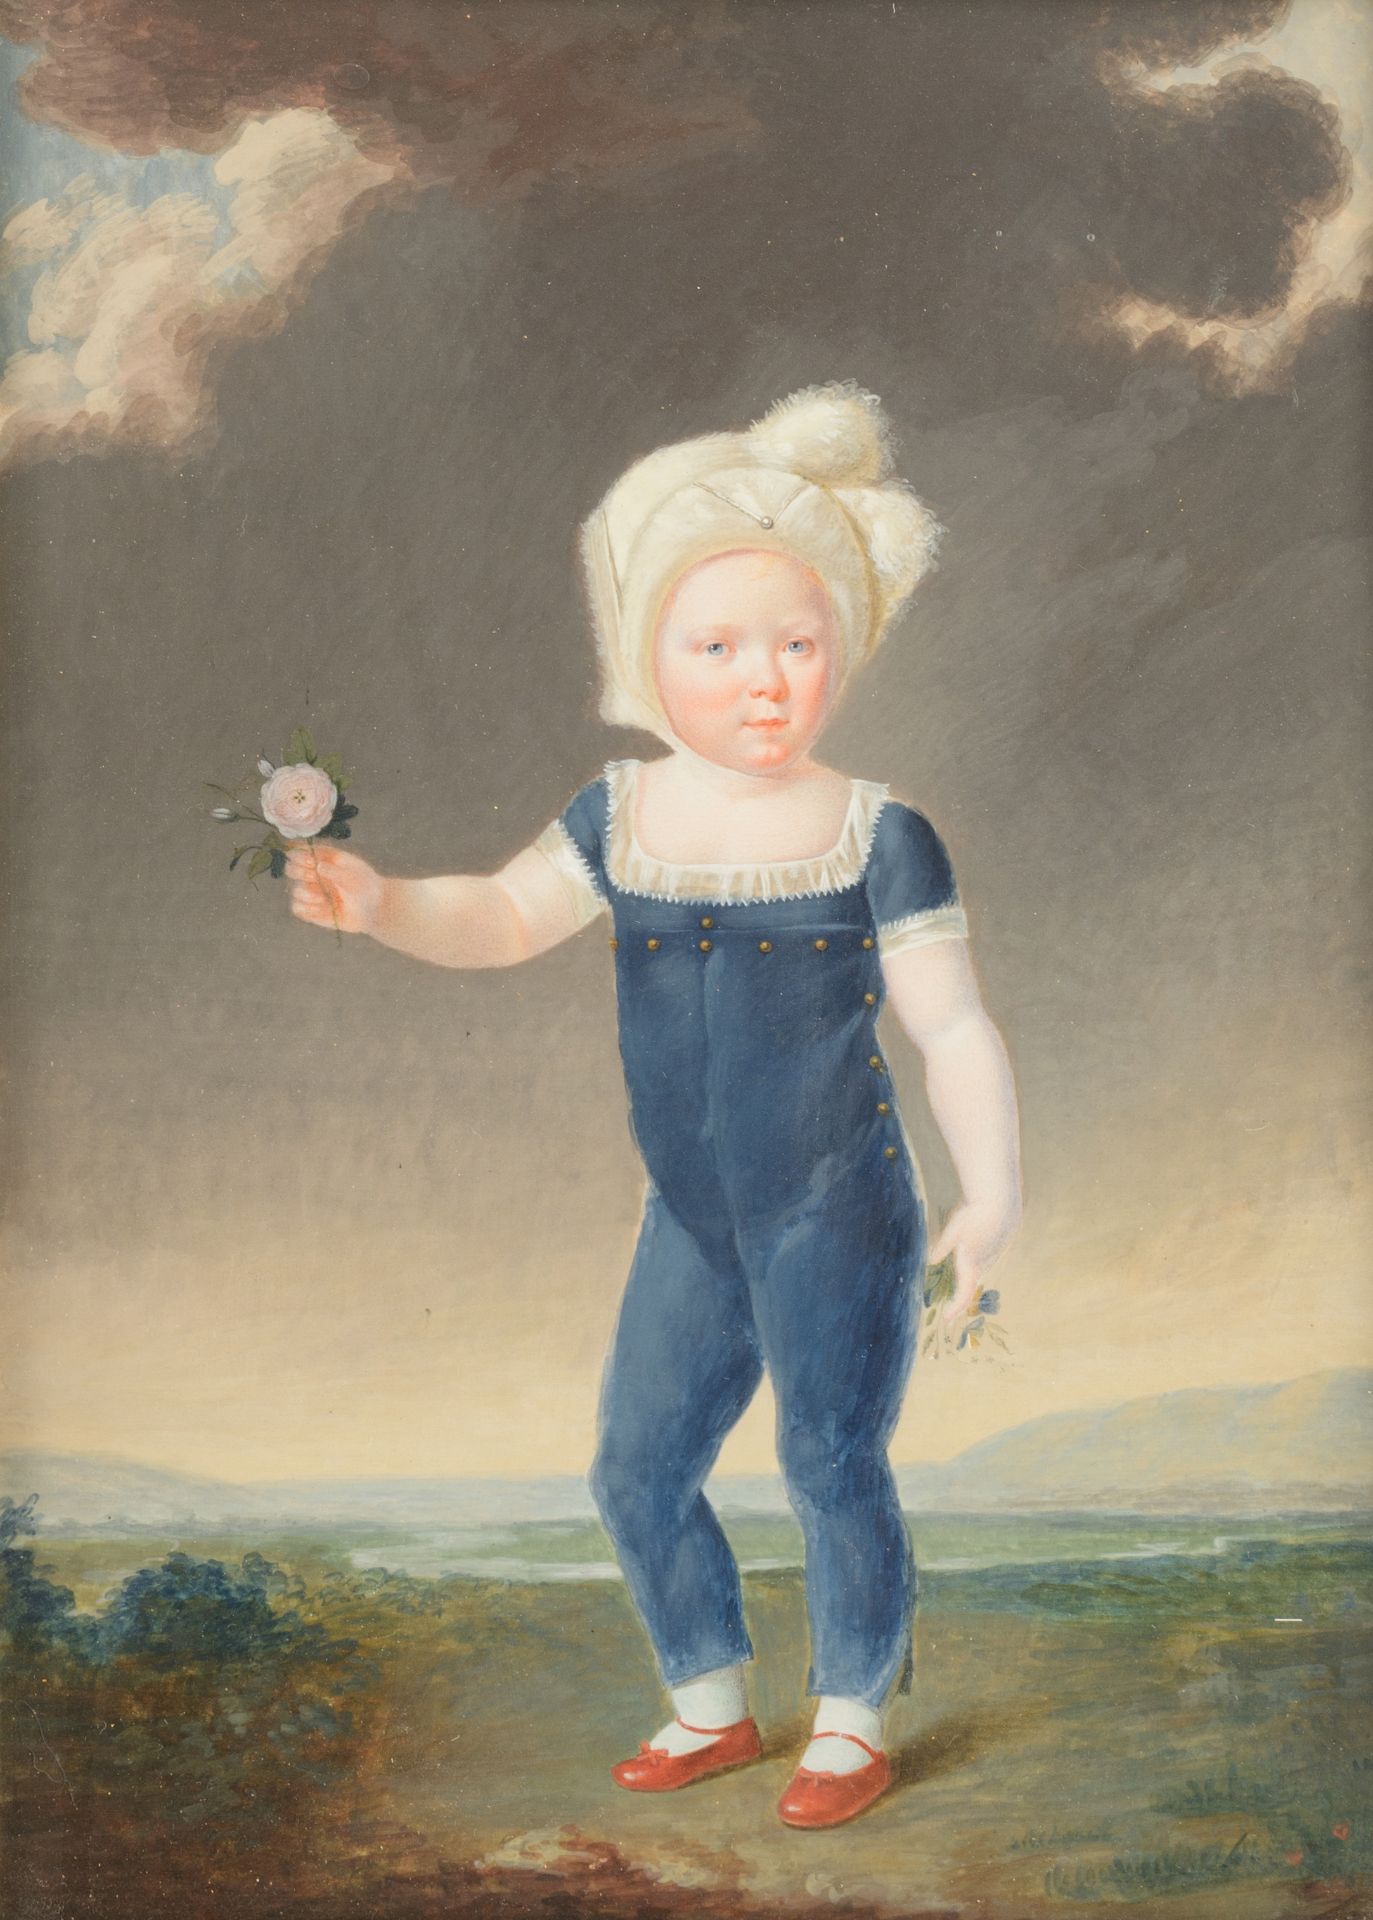 No visible signature, a child holding a flower, late 18thC / early 19thC, watercolour on cardboard,